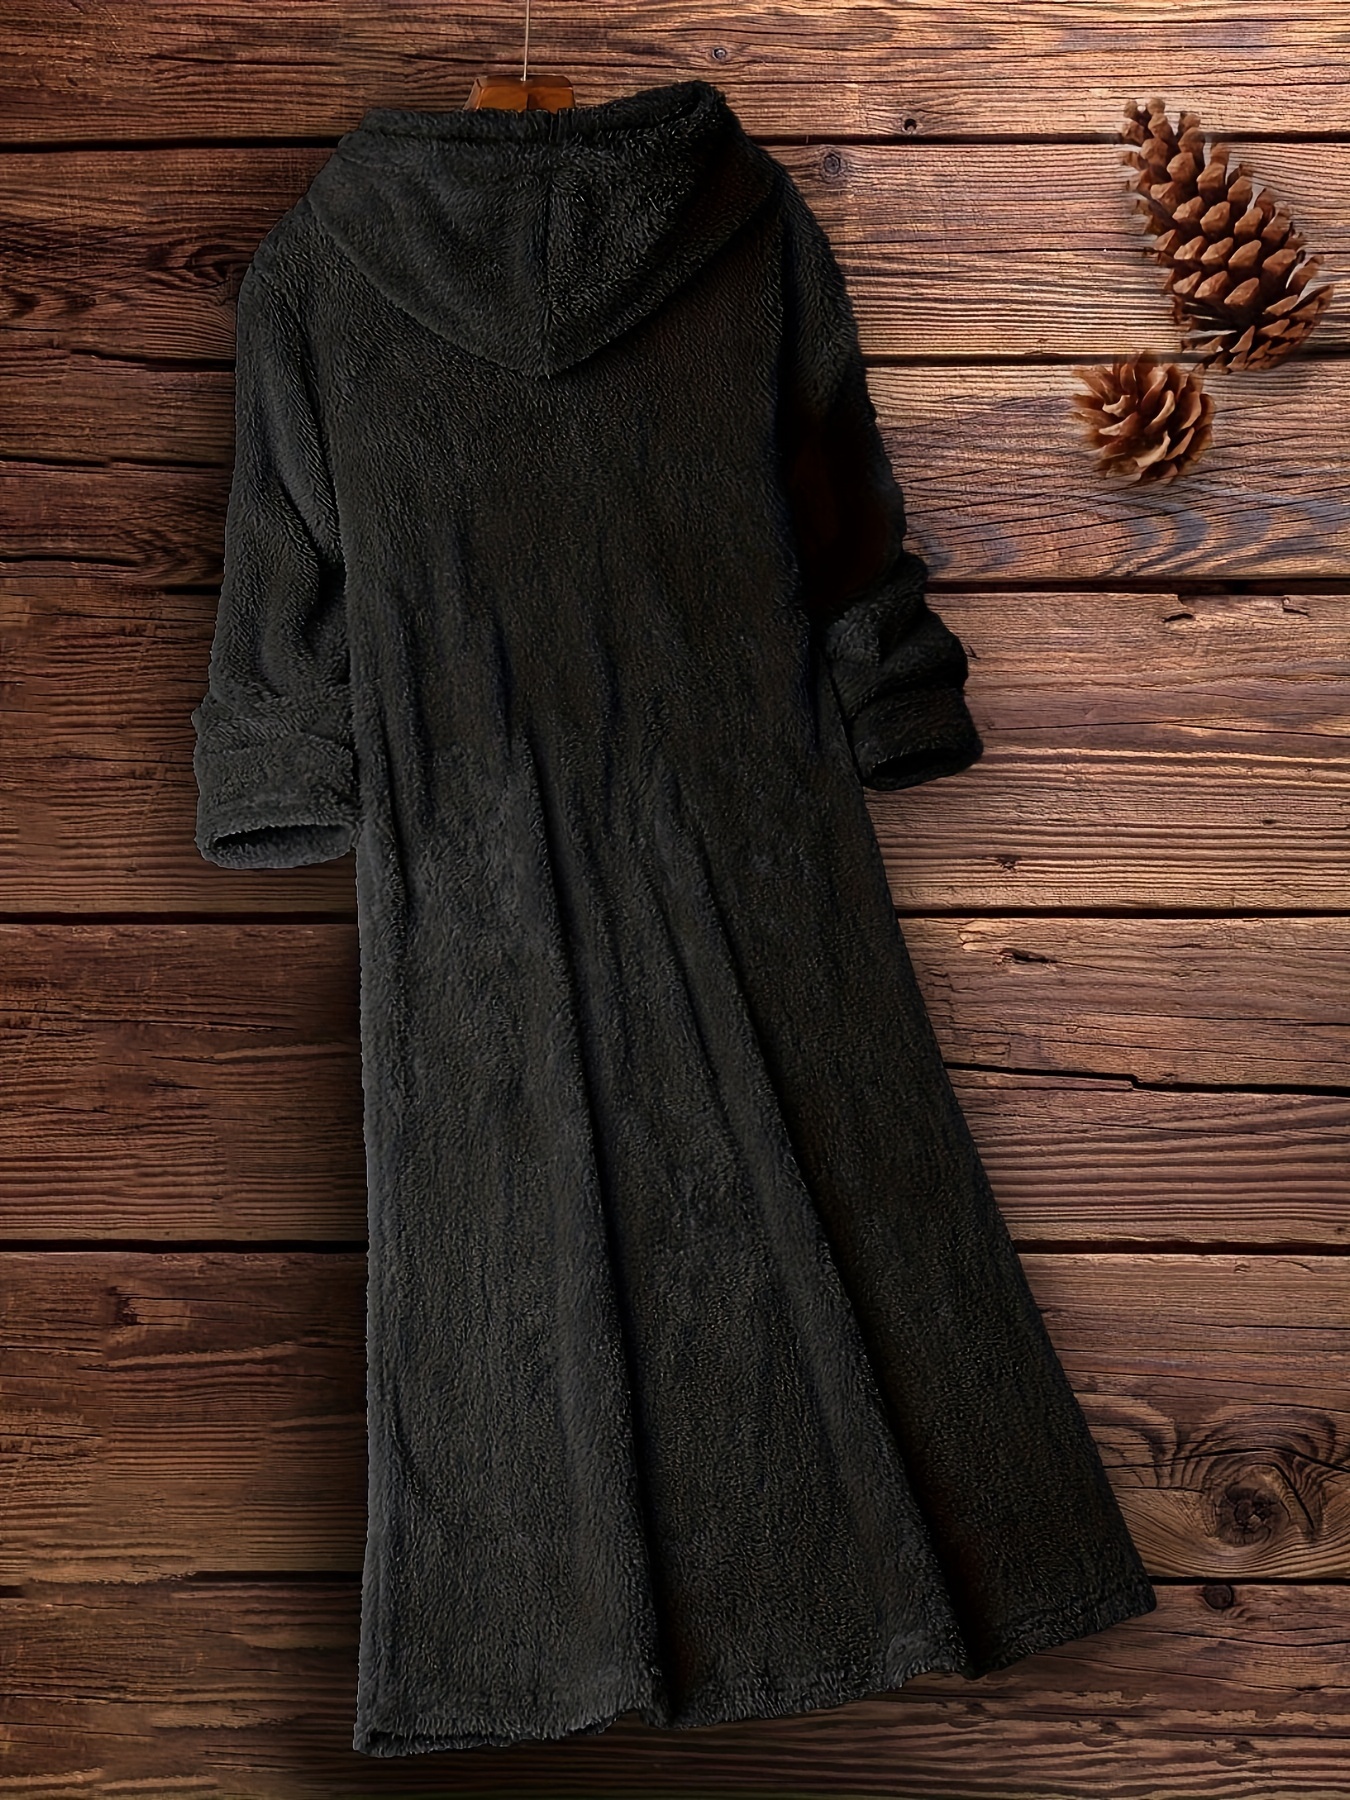 fuzzy hooded midi dress casual pocket front solid long sleeve dress womens clothing details 6